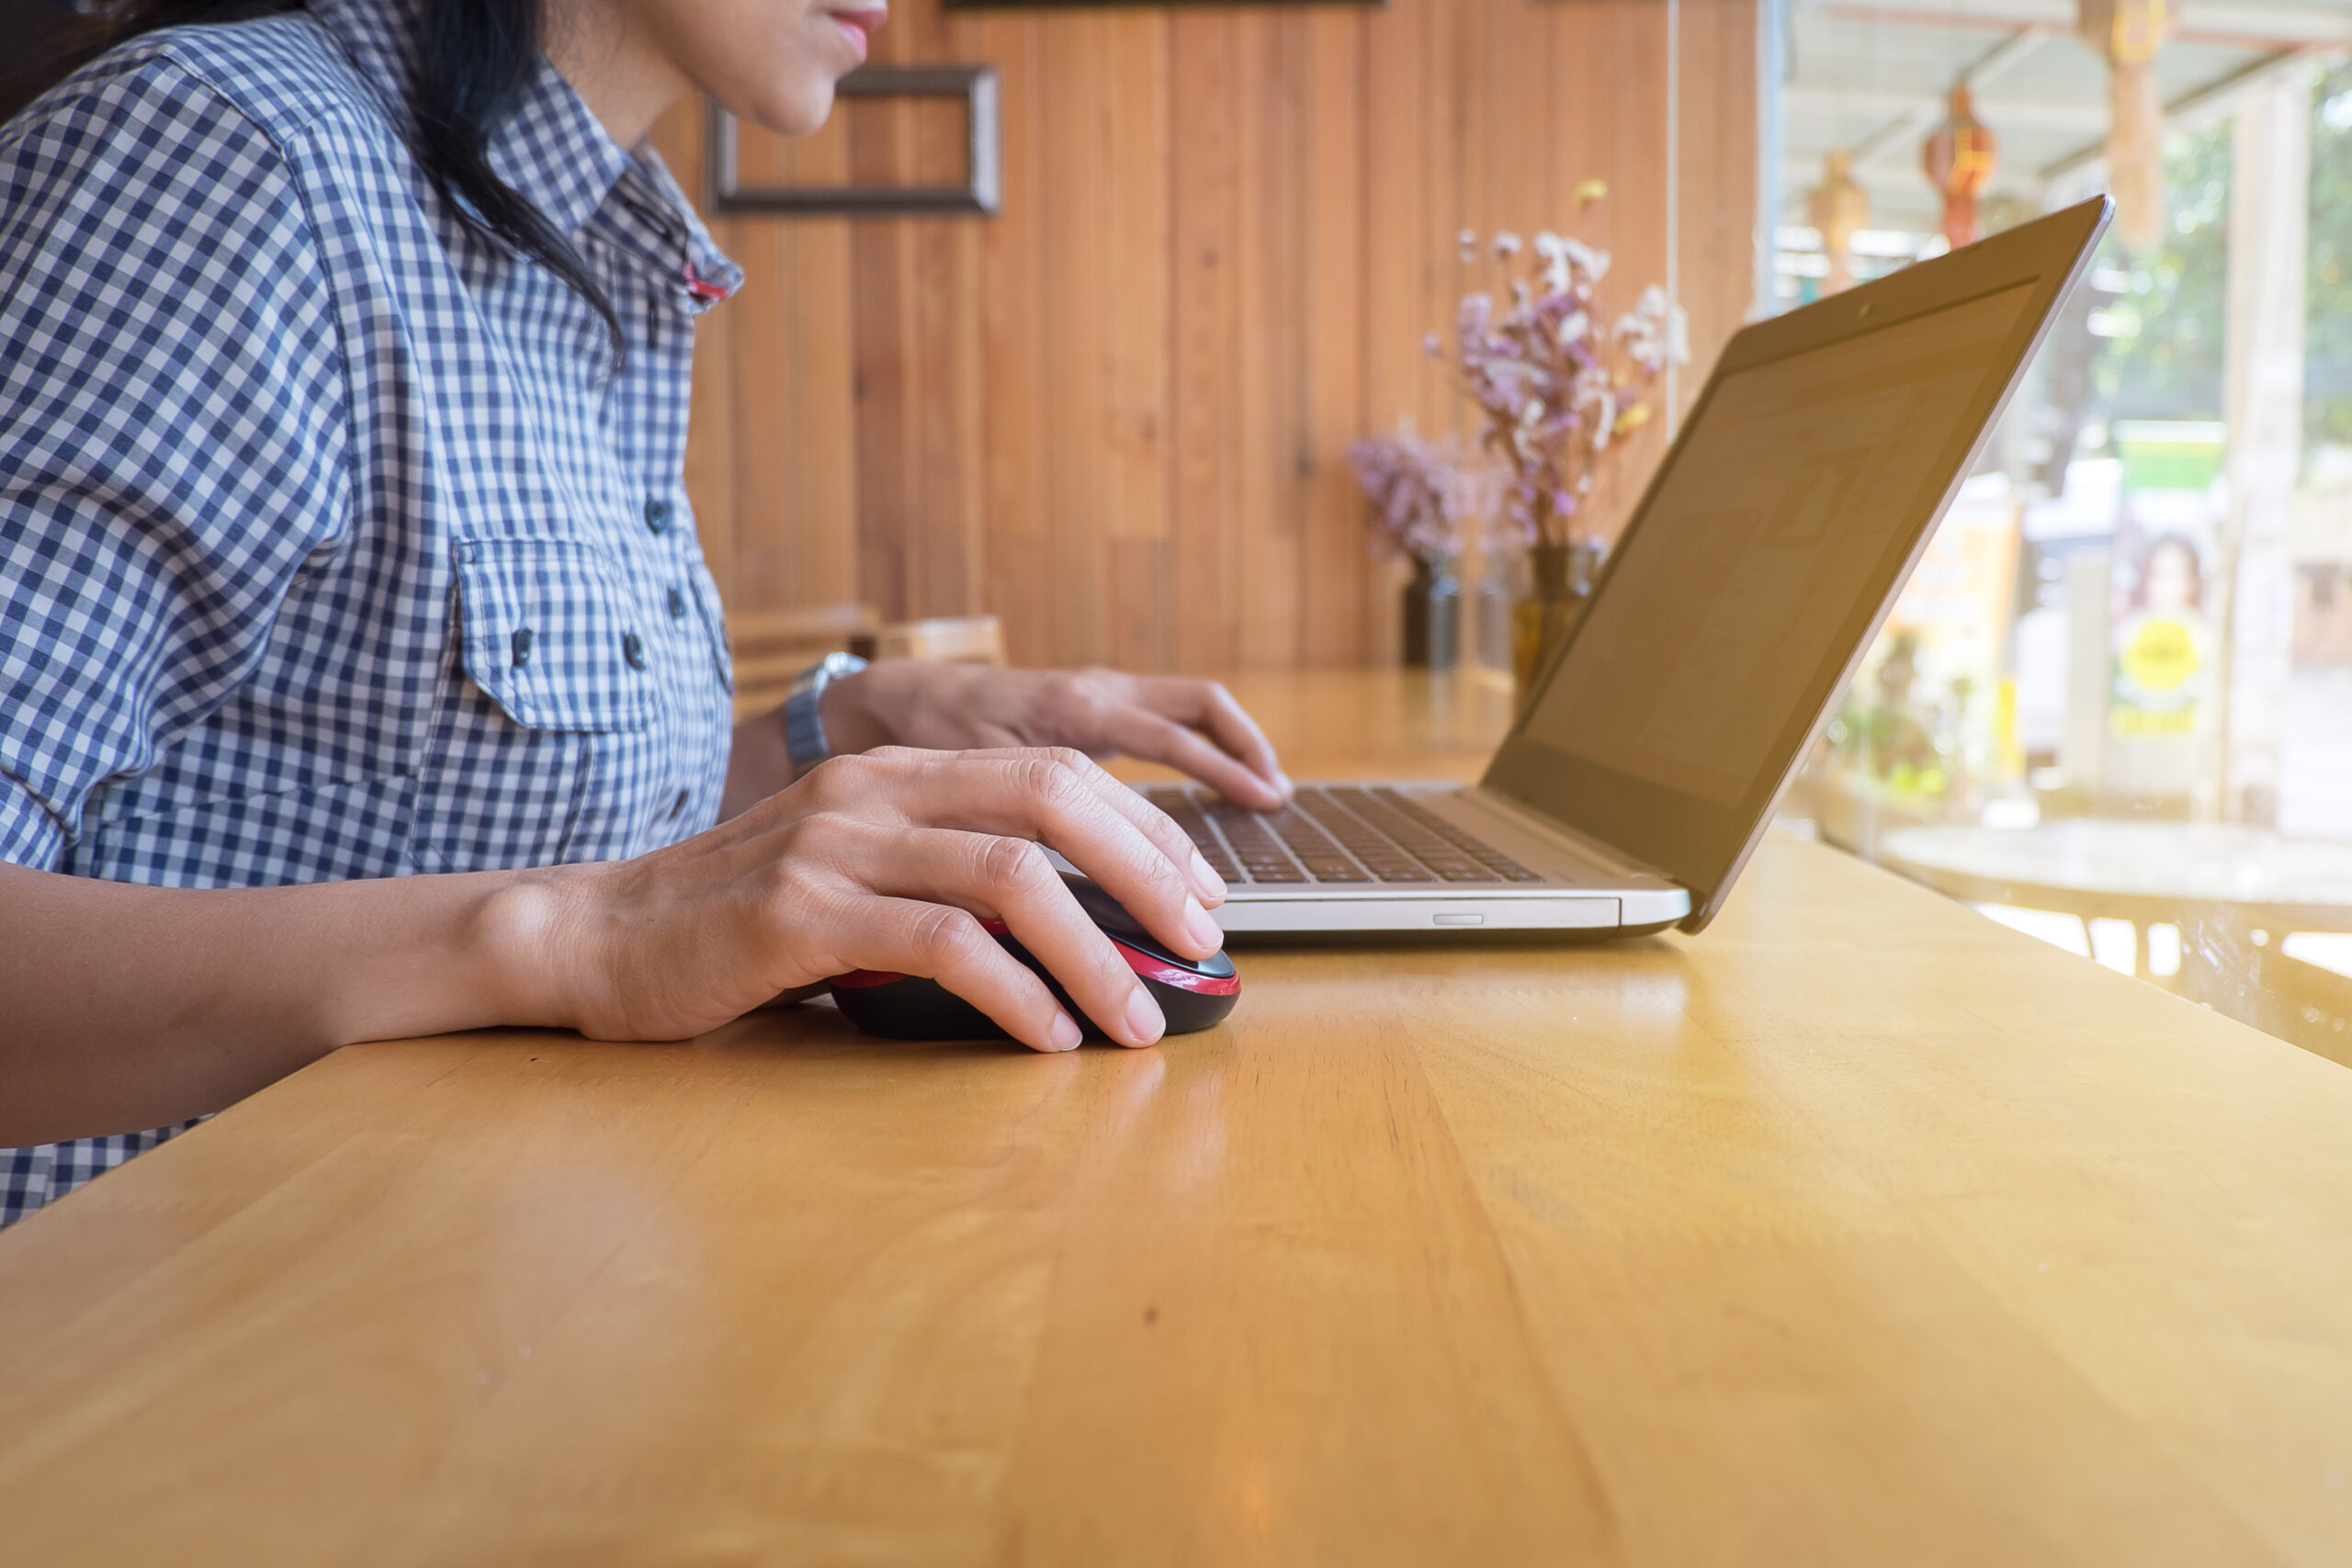 woman's hand clicking on wireless mouse with laptop on wooden table